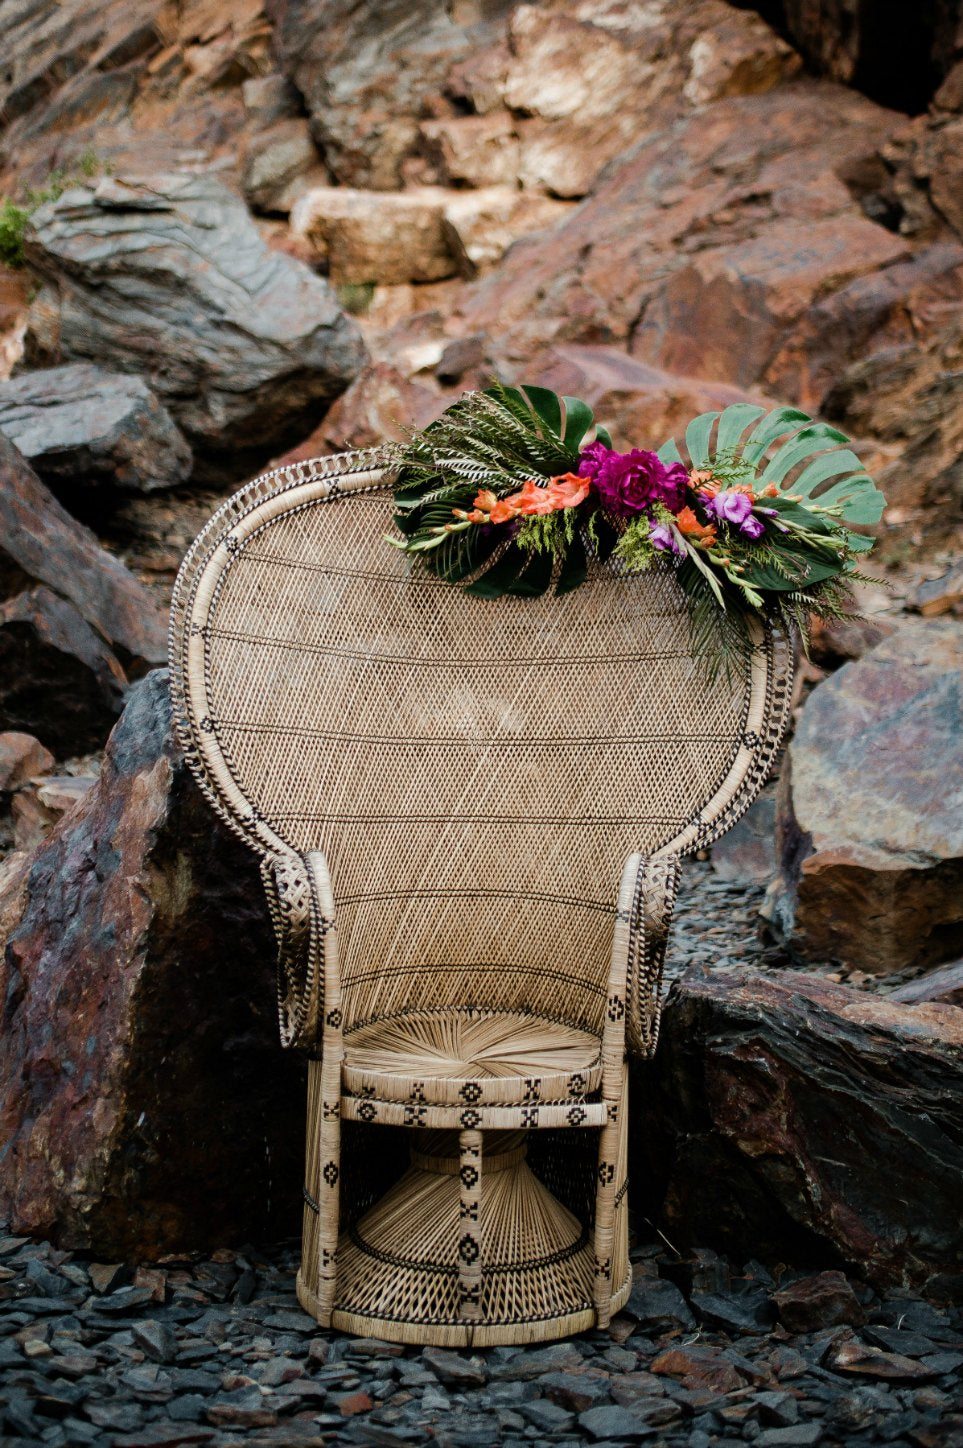 Peacock chair with floral decor in mountains